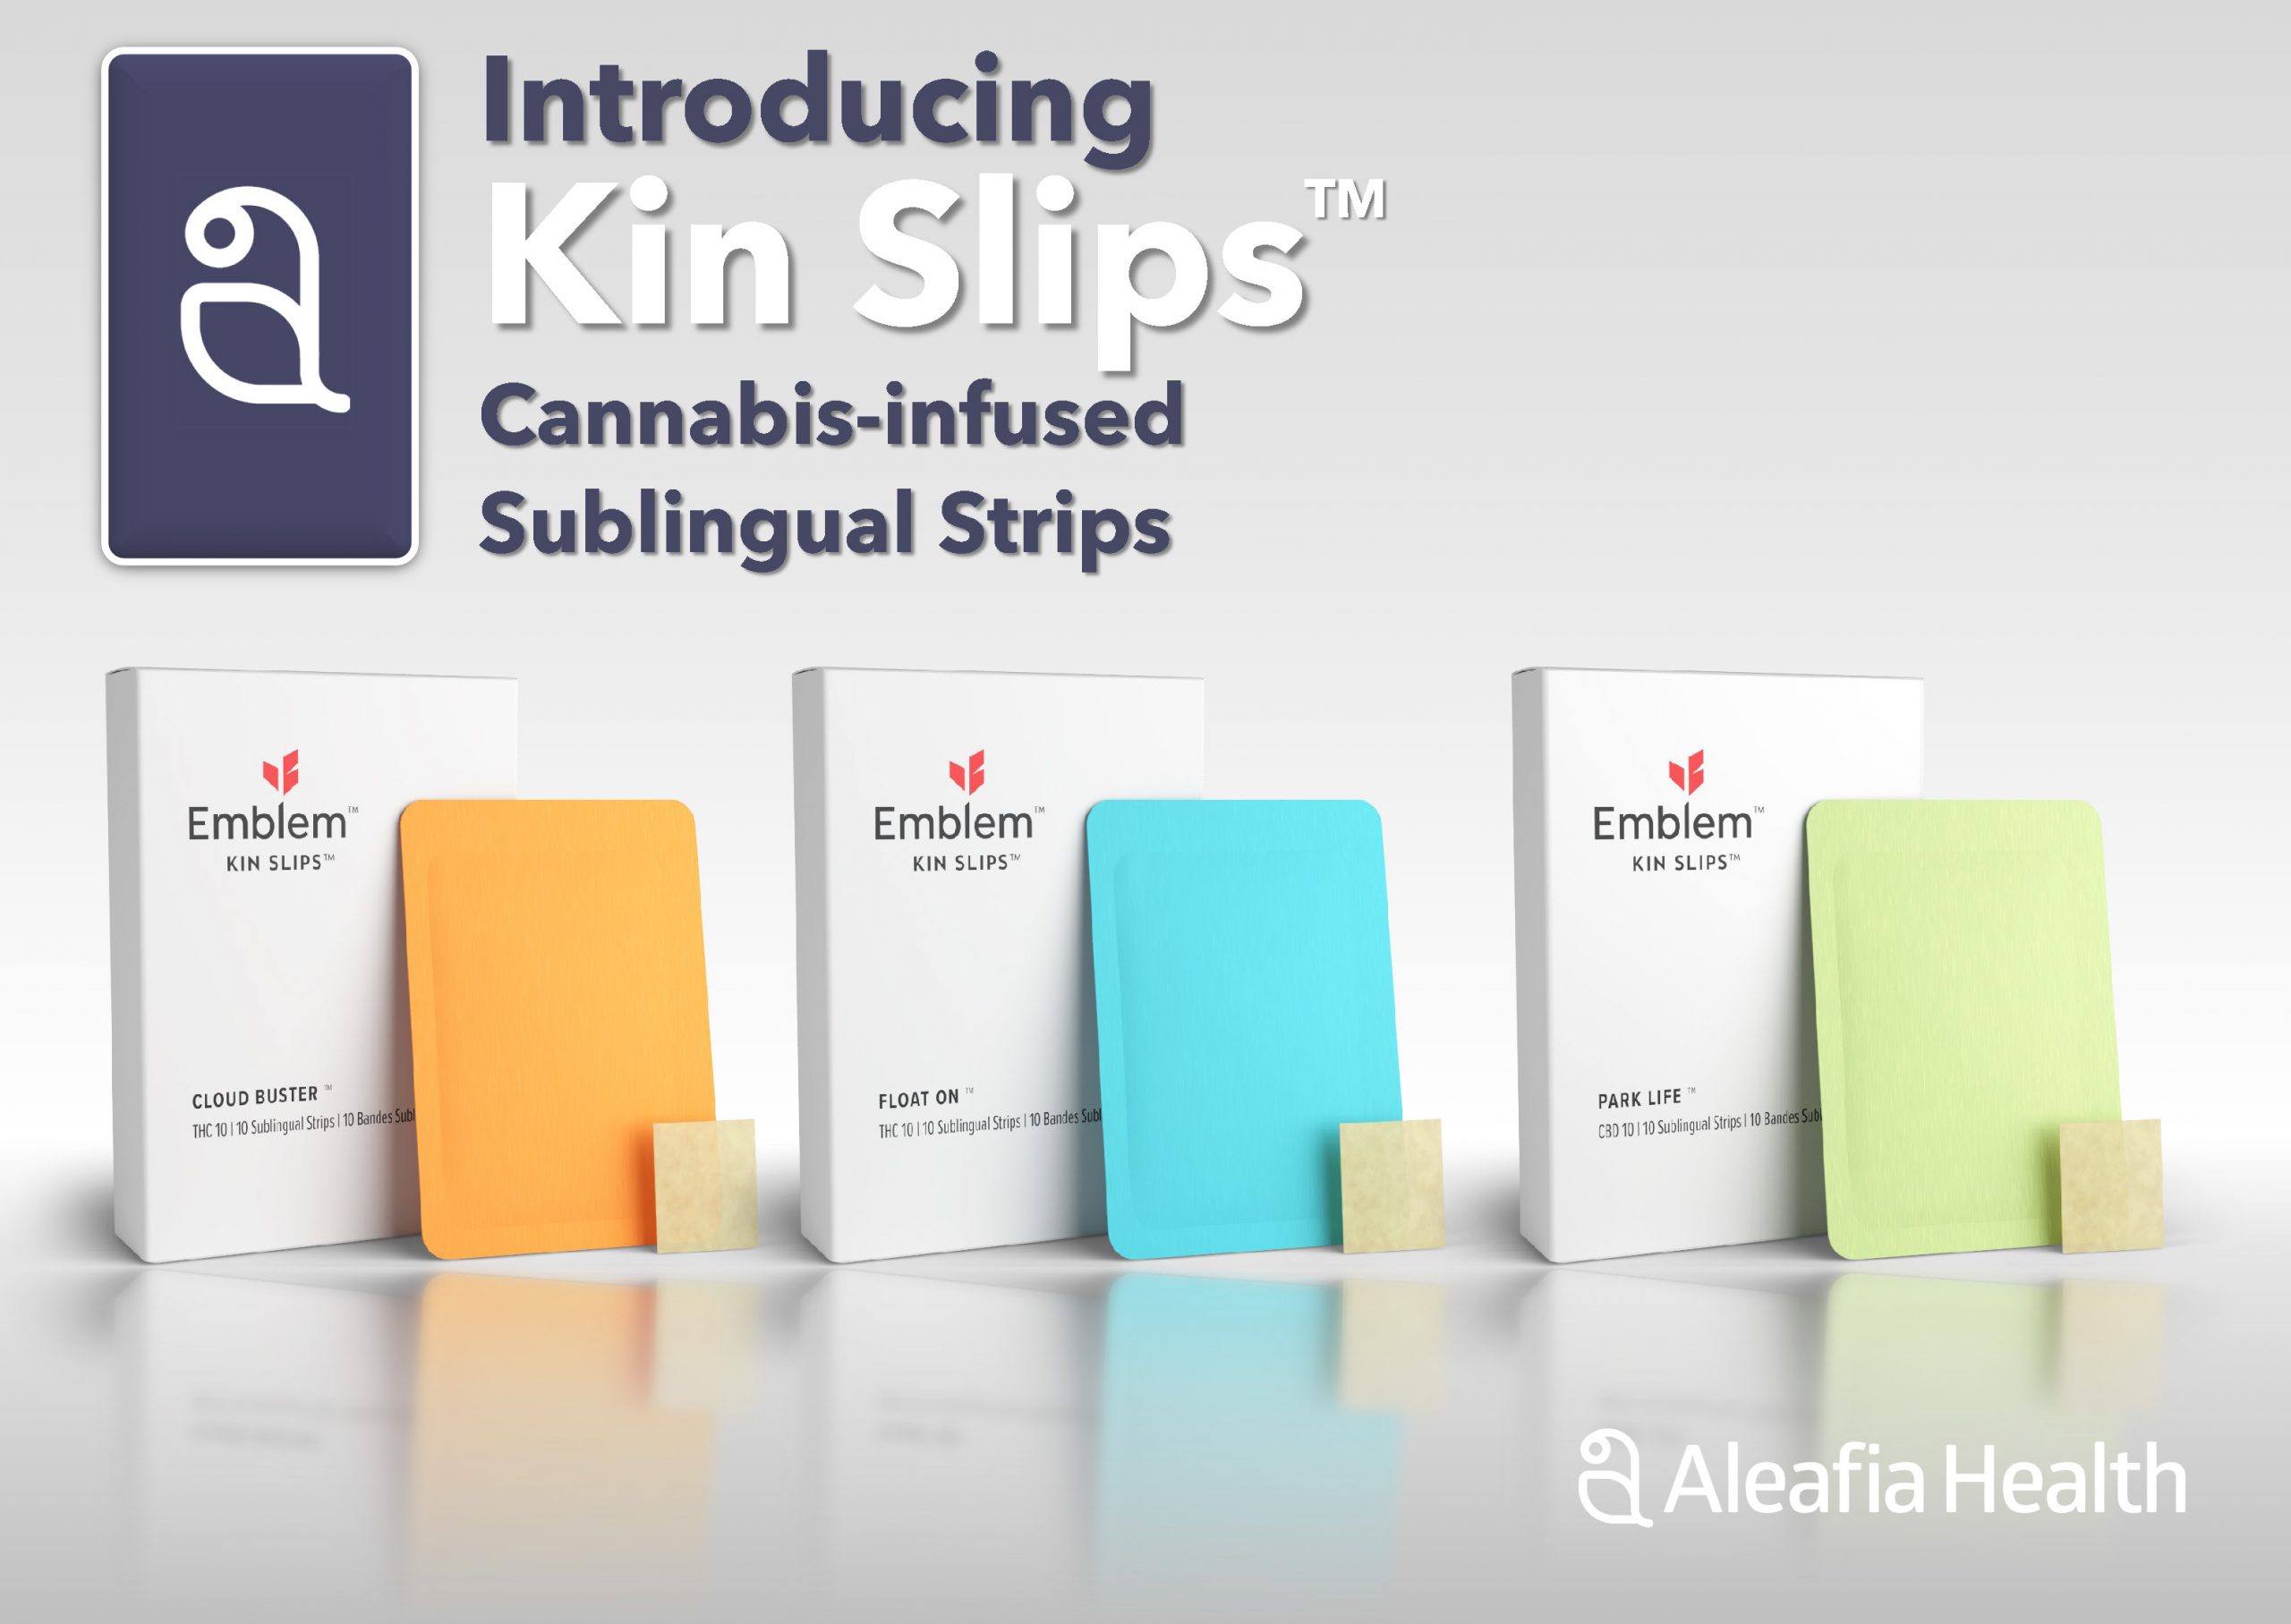 Aleafia Health Launches Kin Slips® Rapid Onset Cannabis-Infused Sublingual Strips